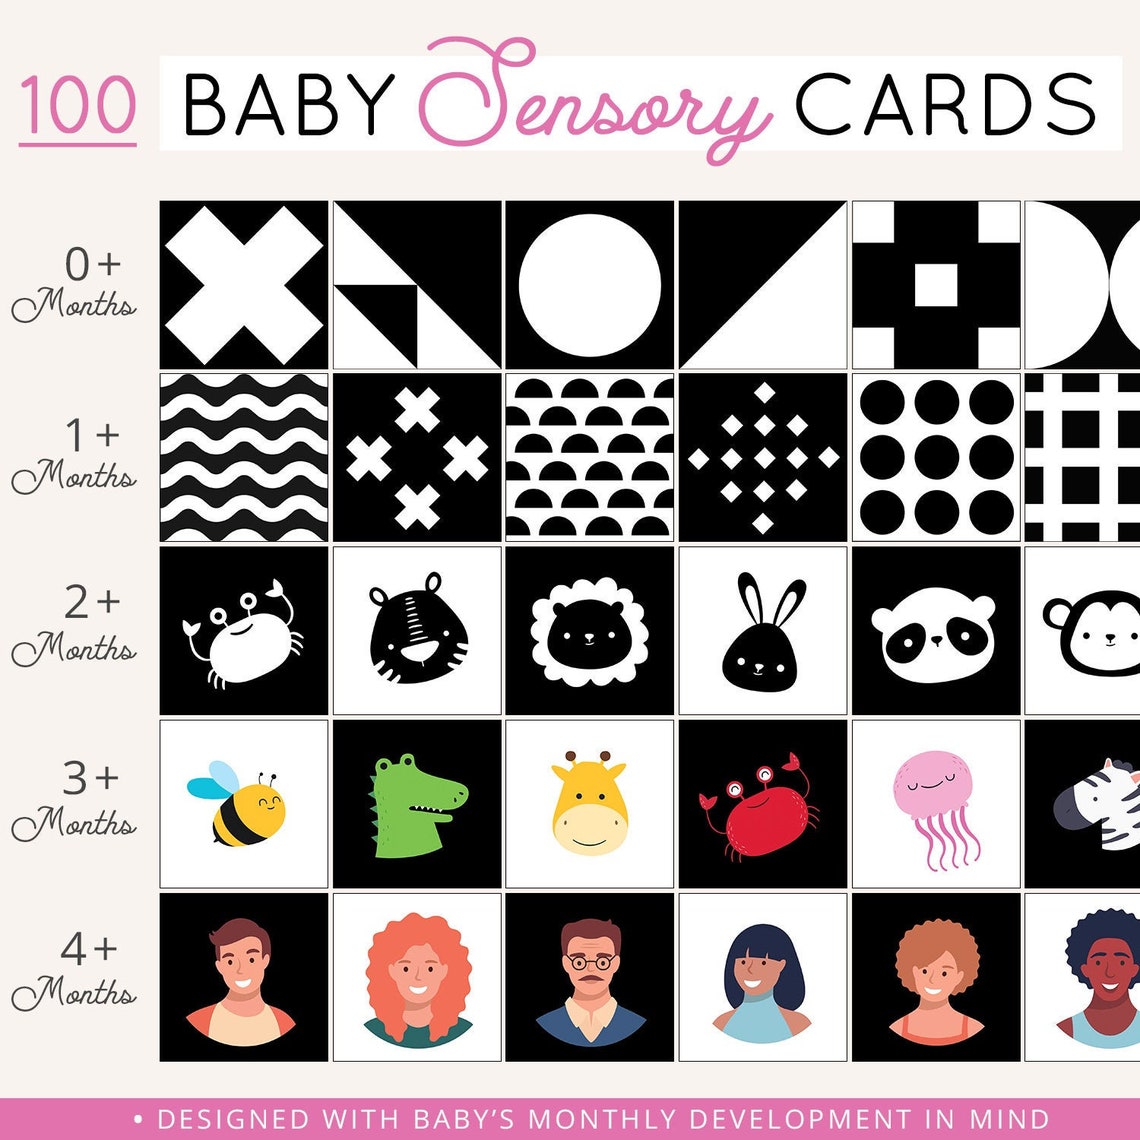 baby-sensory-cards-printable-set-of-100-high-contrast-baby-etsy